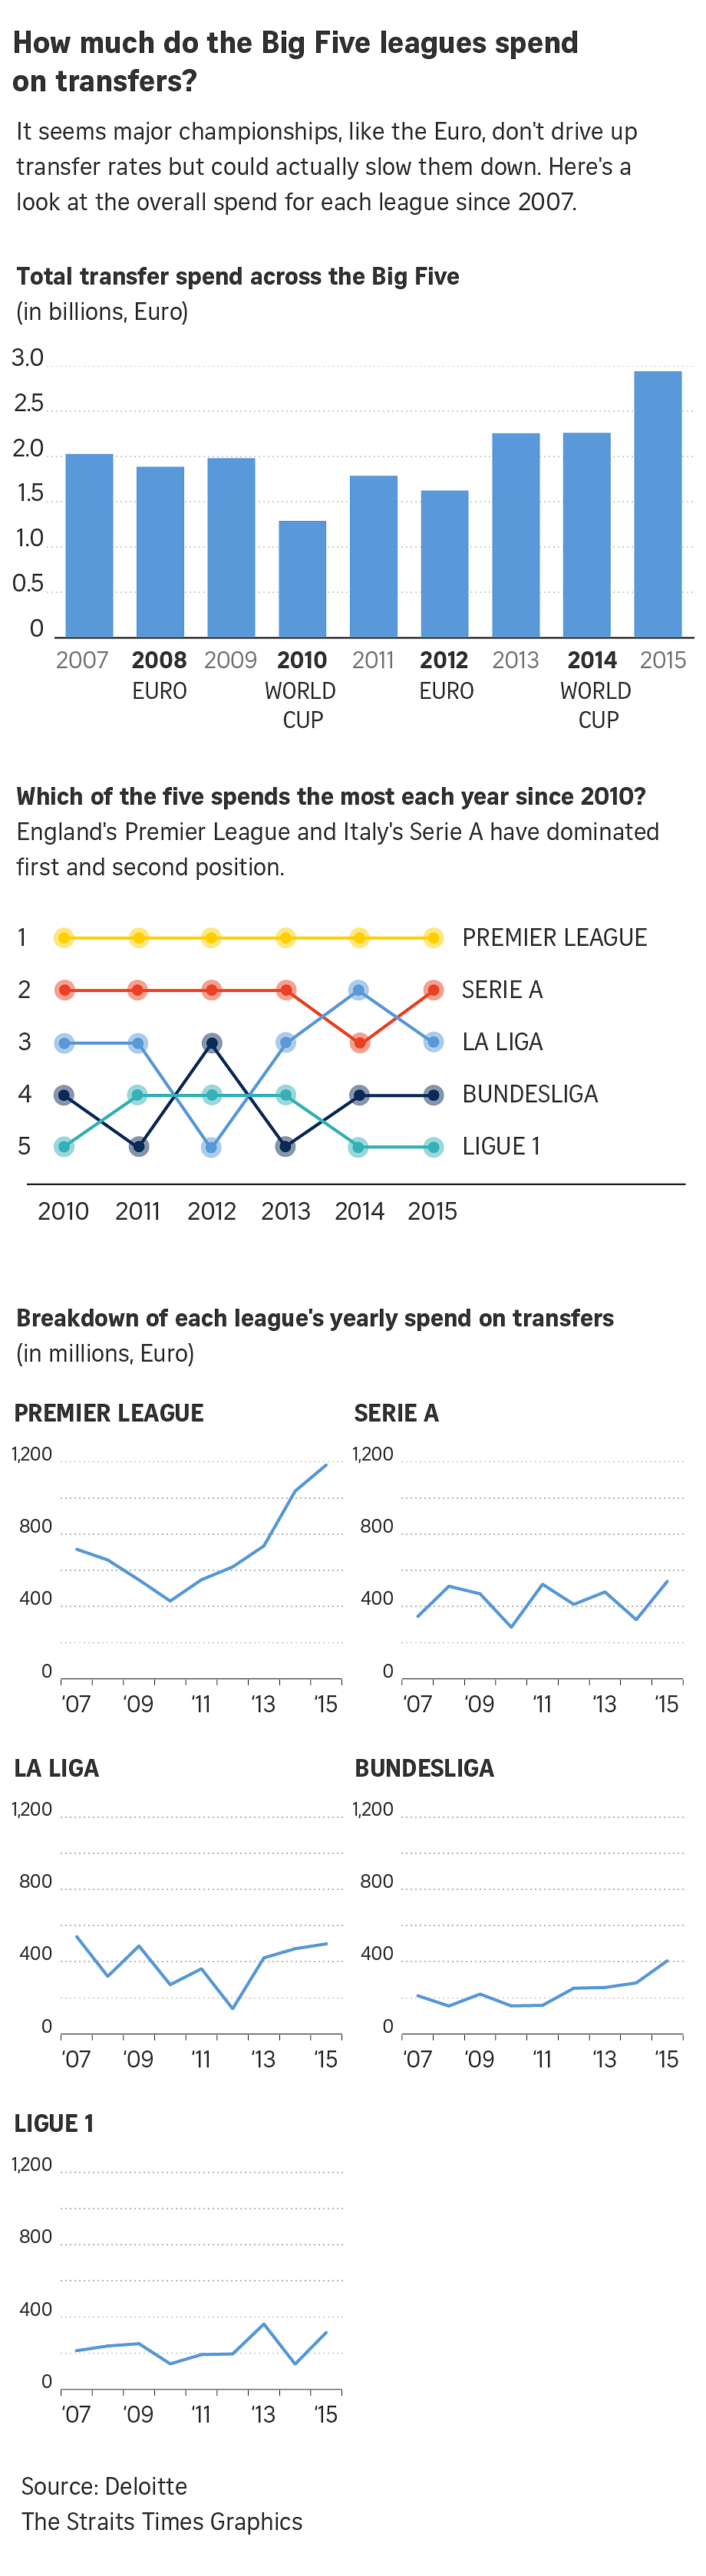 It seems major championships, like the Euro, don't drive up transfer rates but could actually slow them down. Here's a look at the overall spend for each league since 2007.